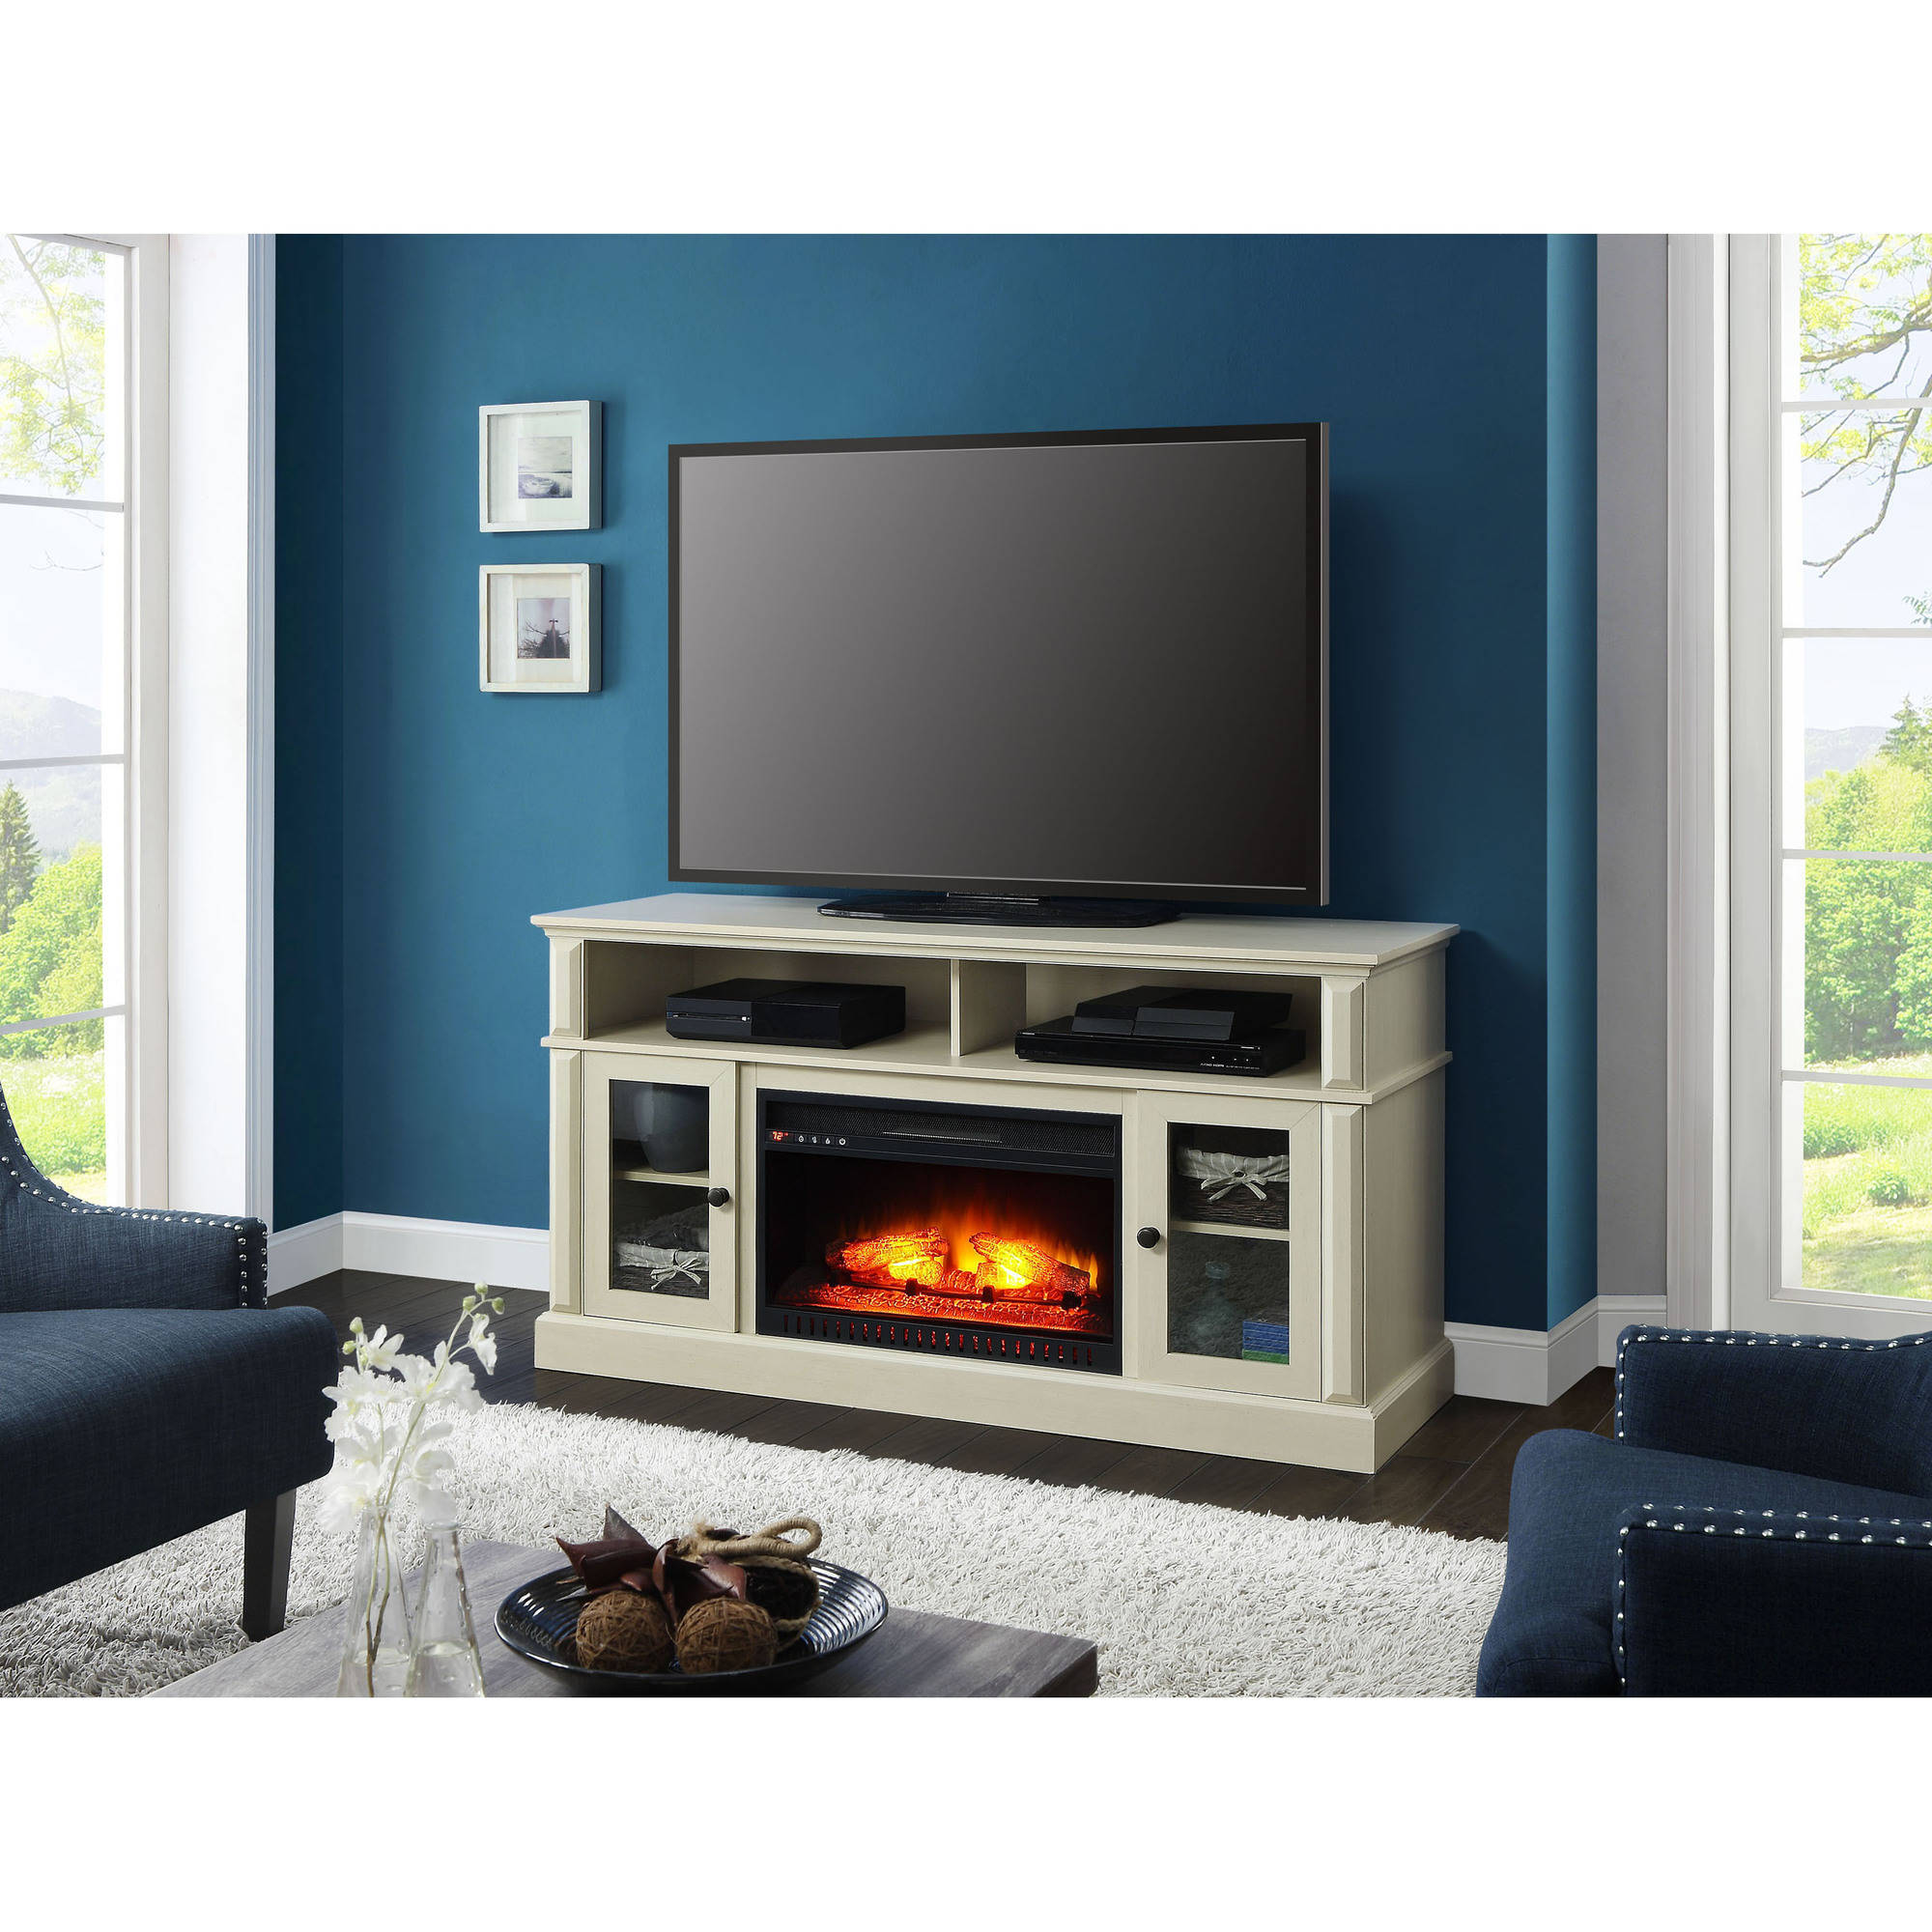 55 Inch Corner Tv Stand with Fireplace Elegant Whalen Barston Media Fireplace for Tv S Up to 70 Multiple